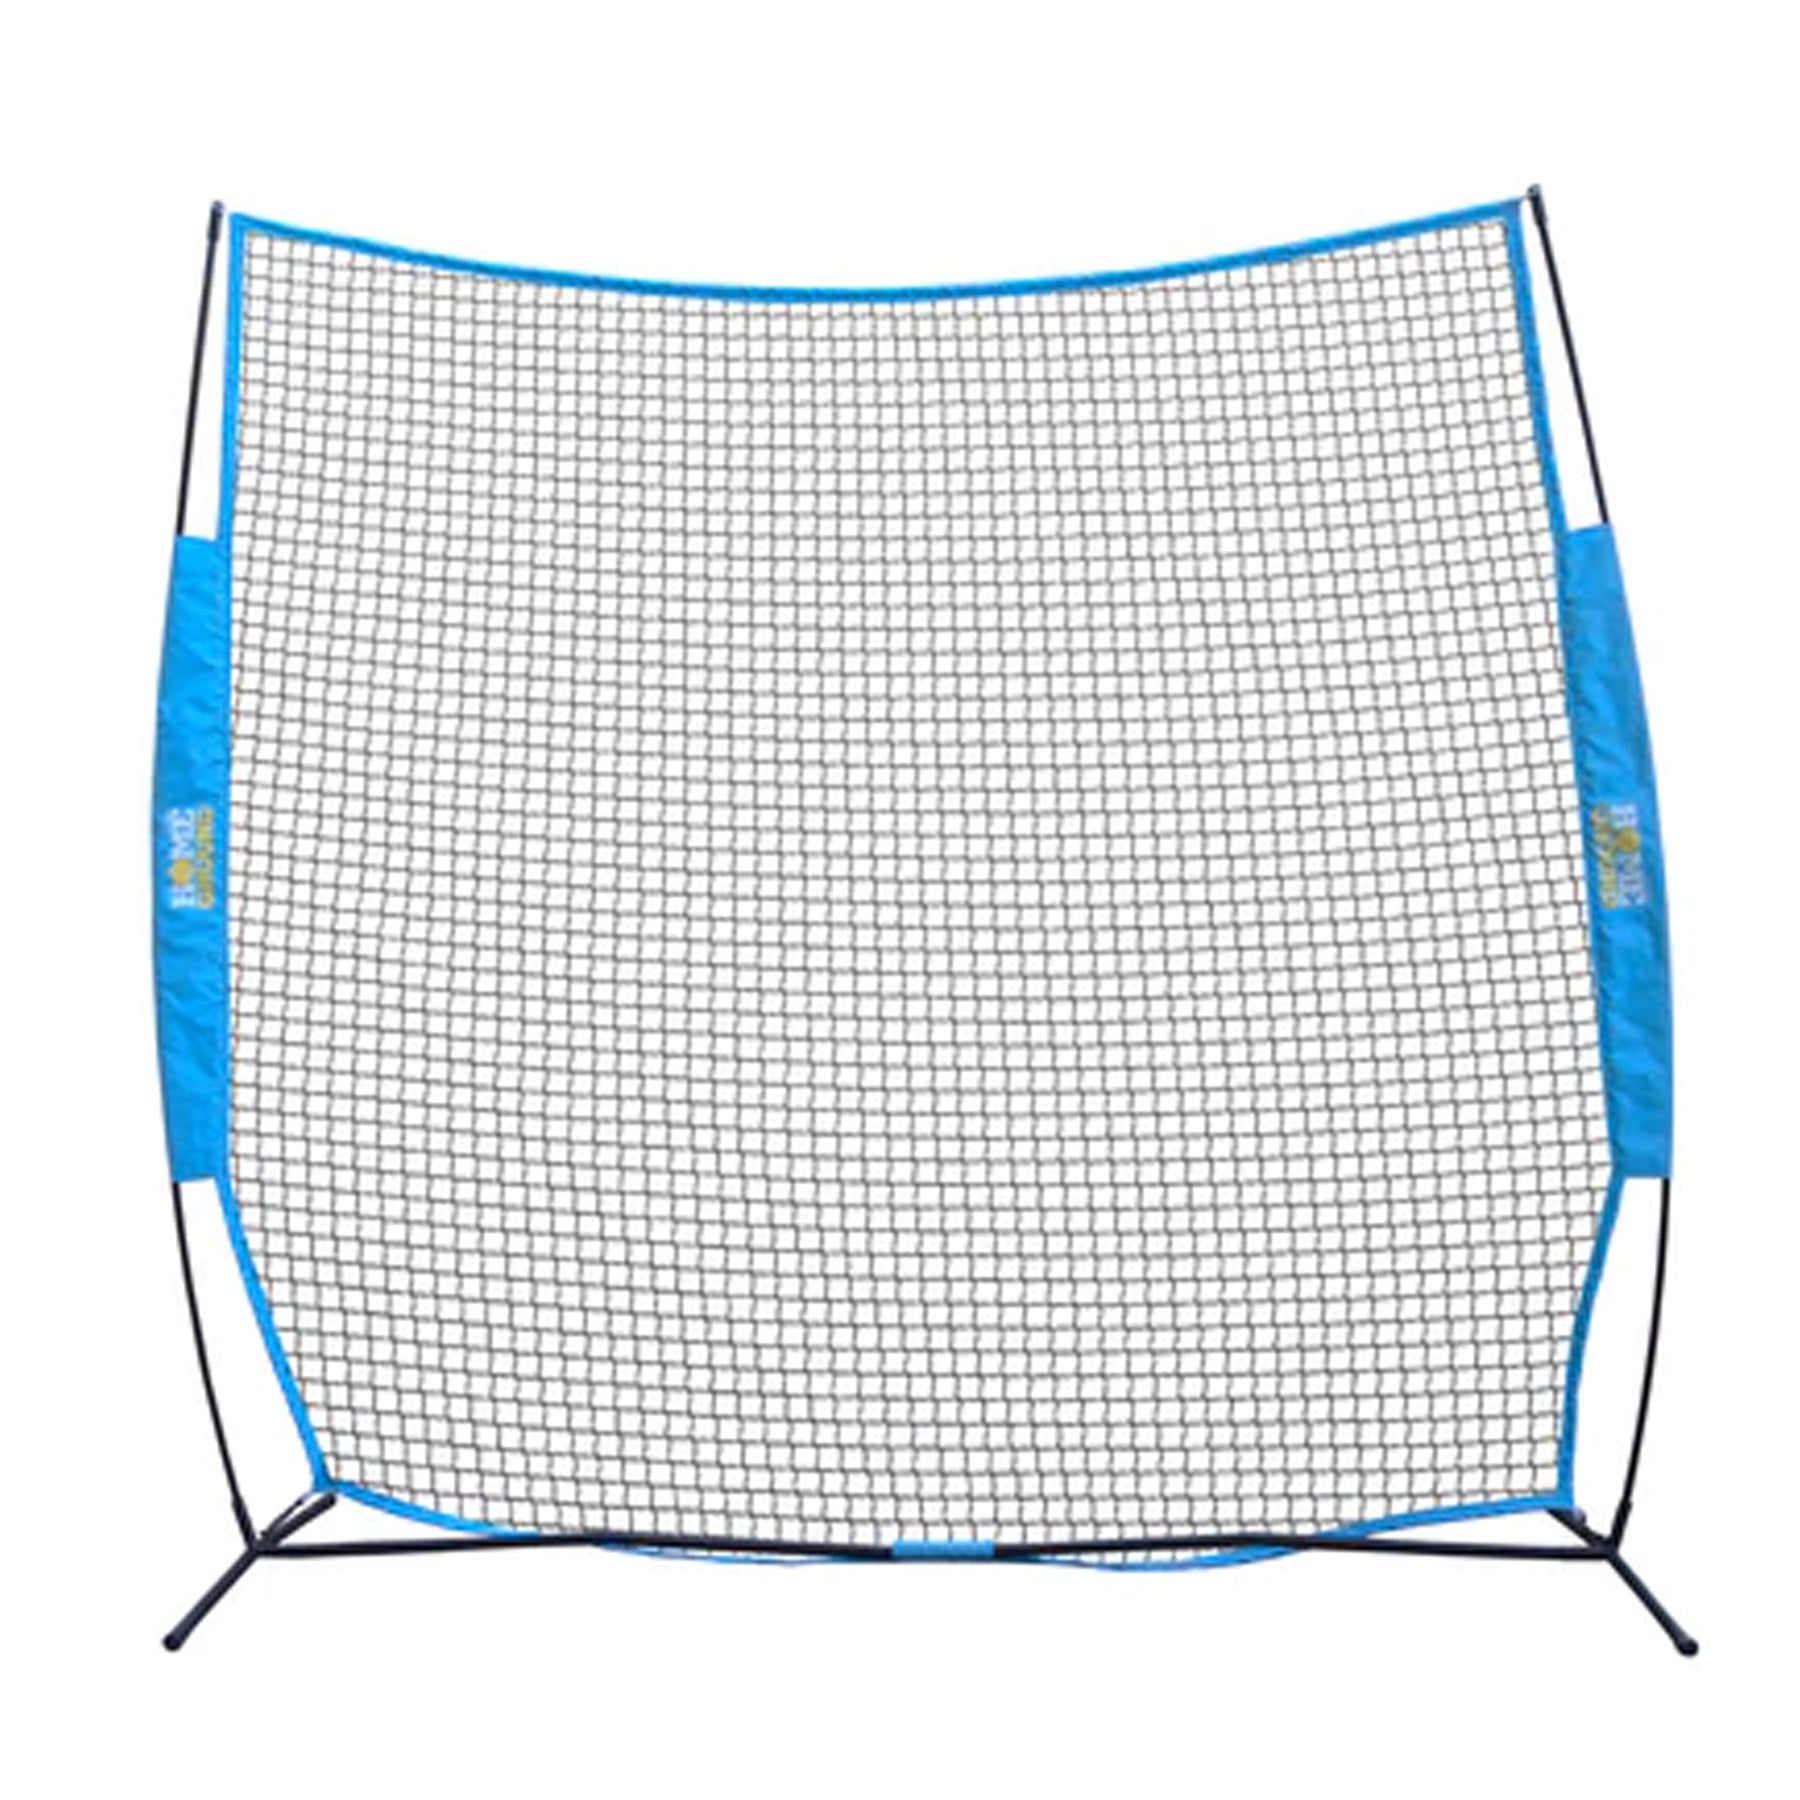 Paceman 176 XT Bowling Machine - Back Net Included